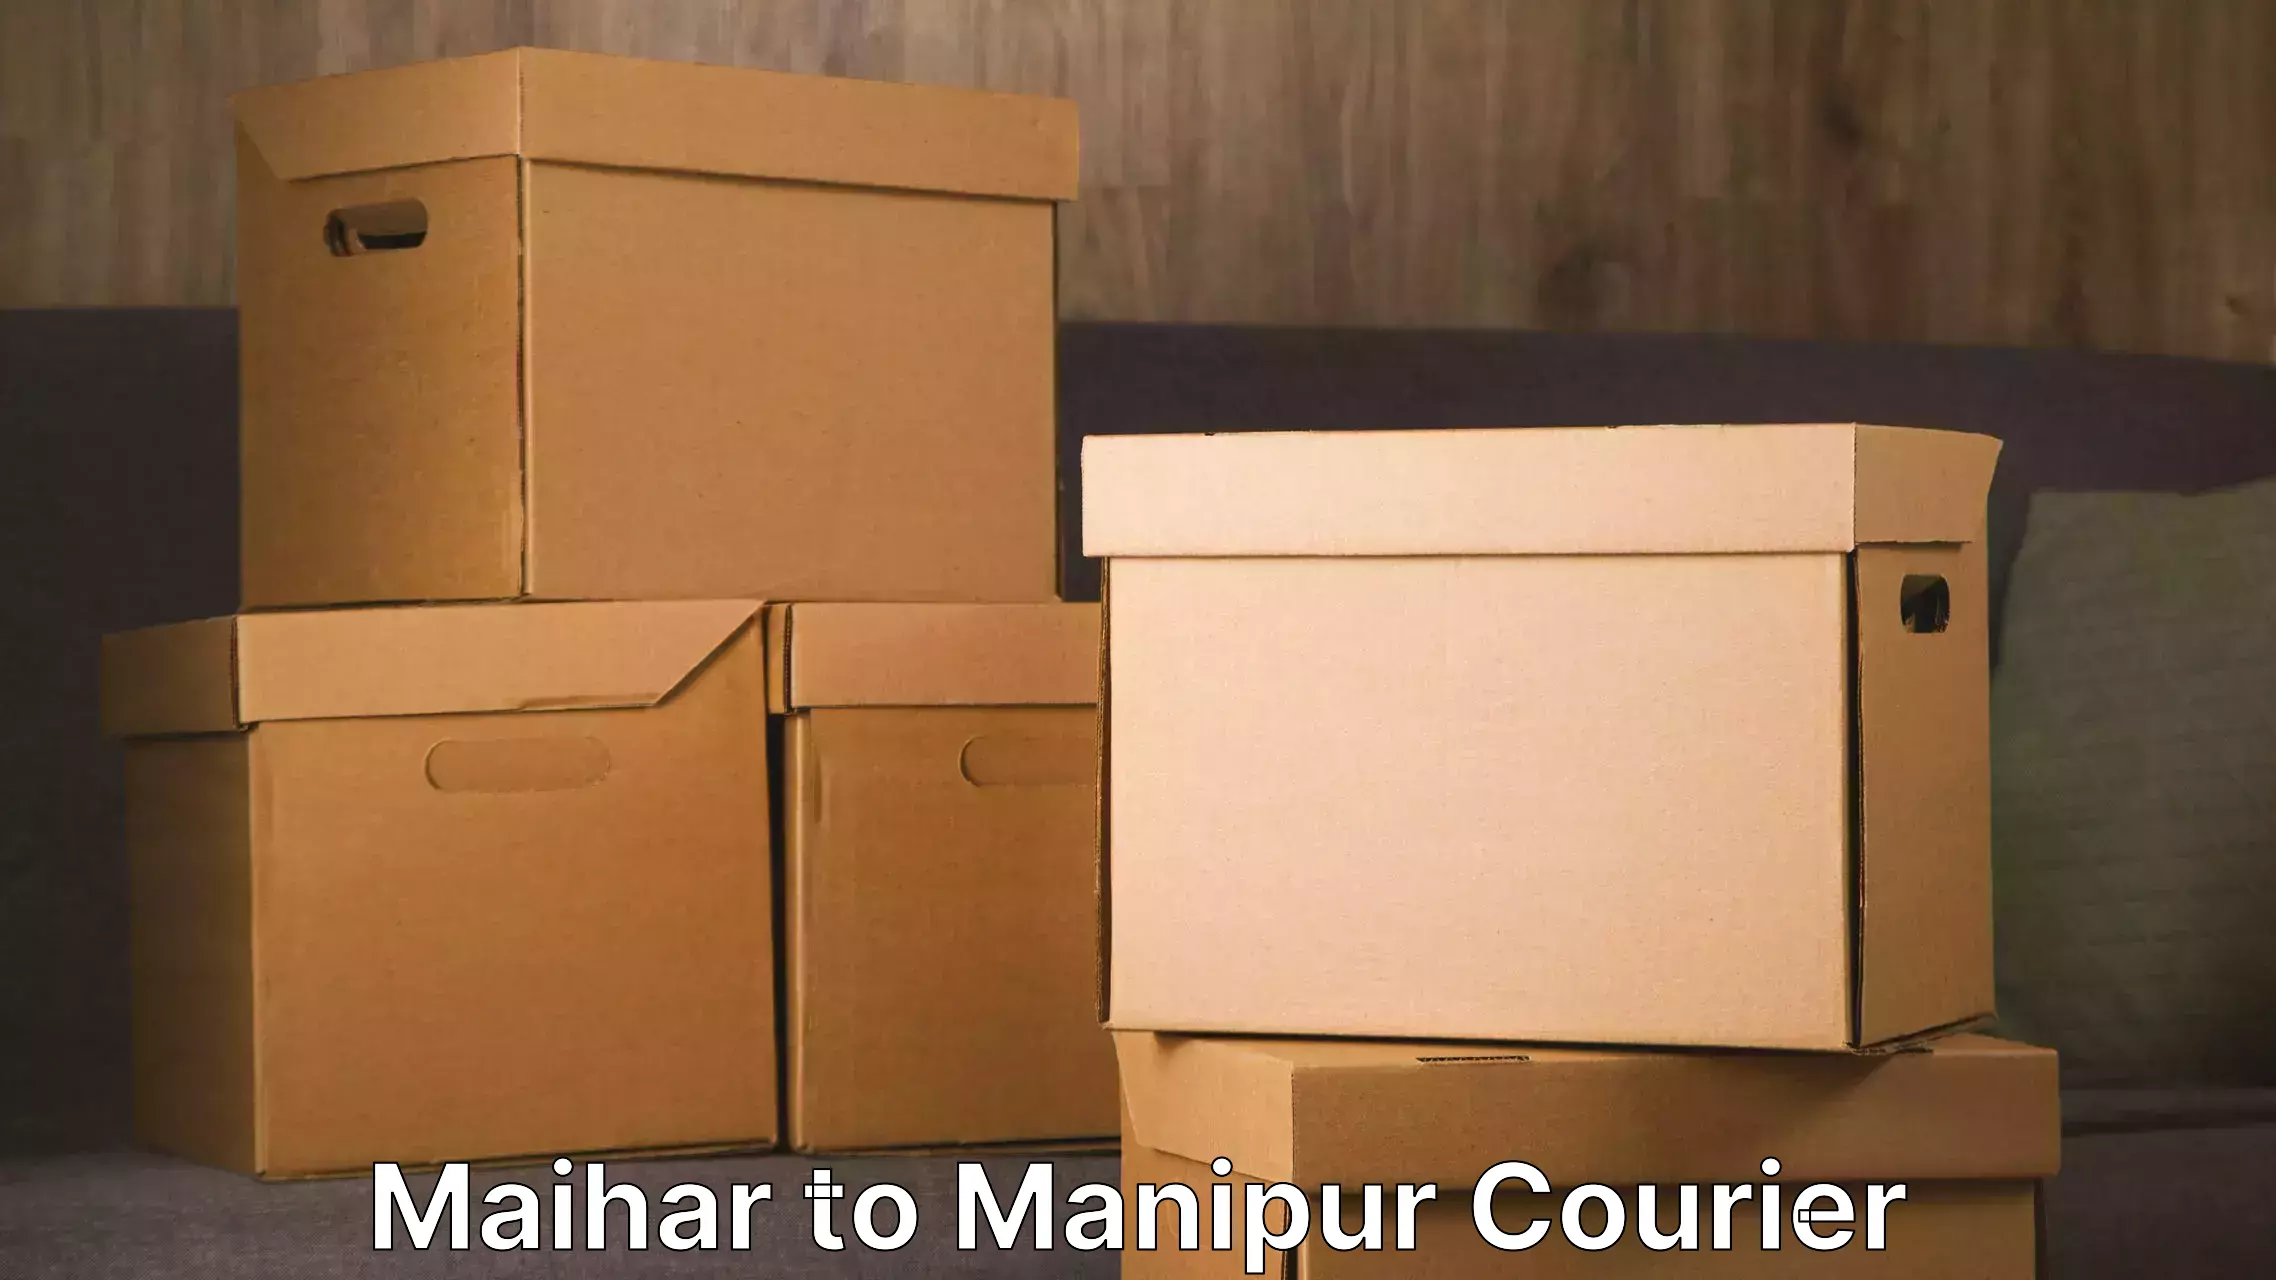 Furniture moving service Maihar to Manipur